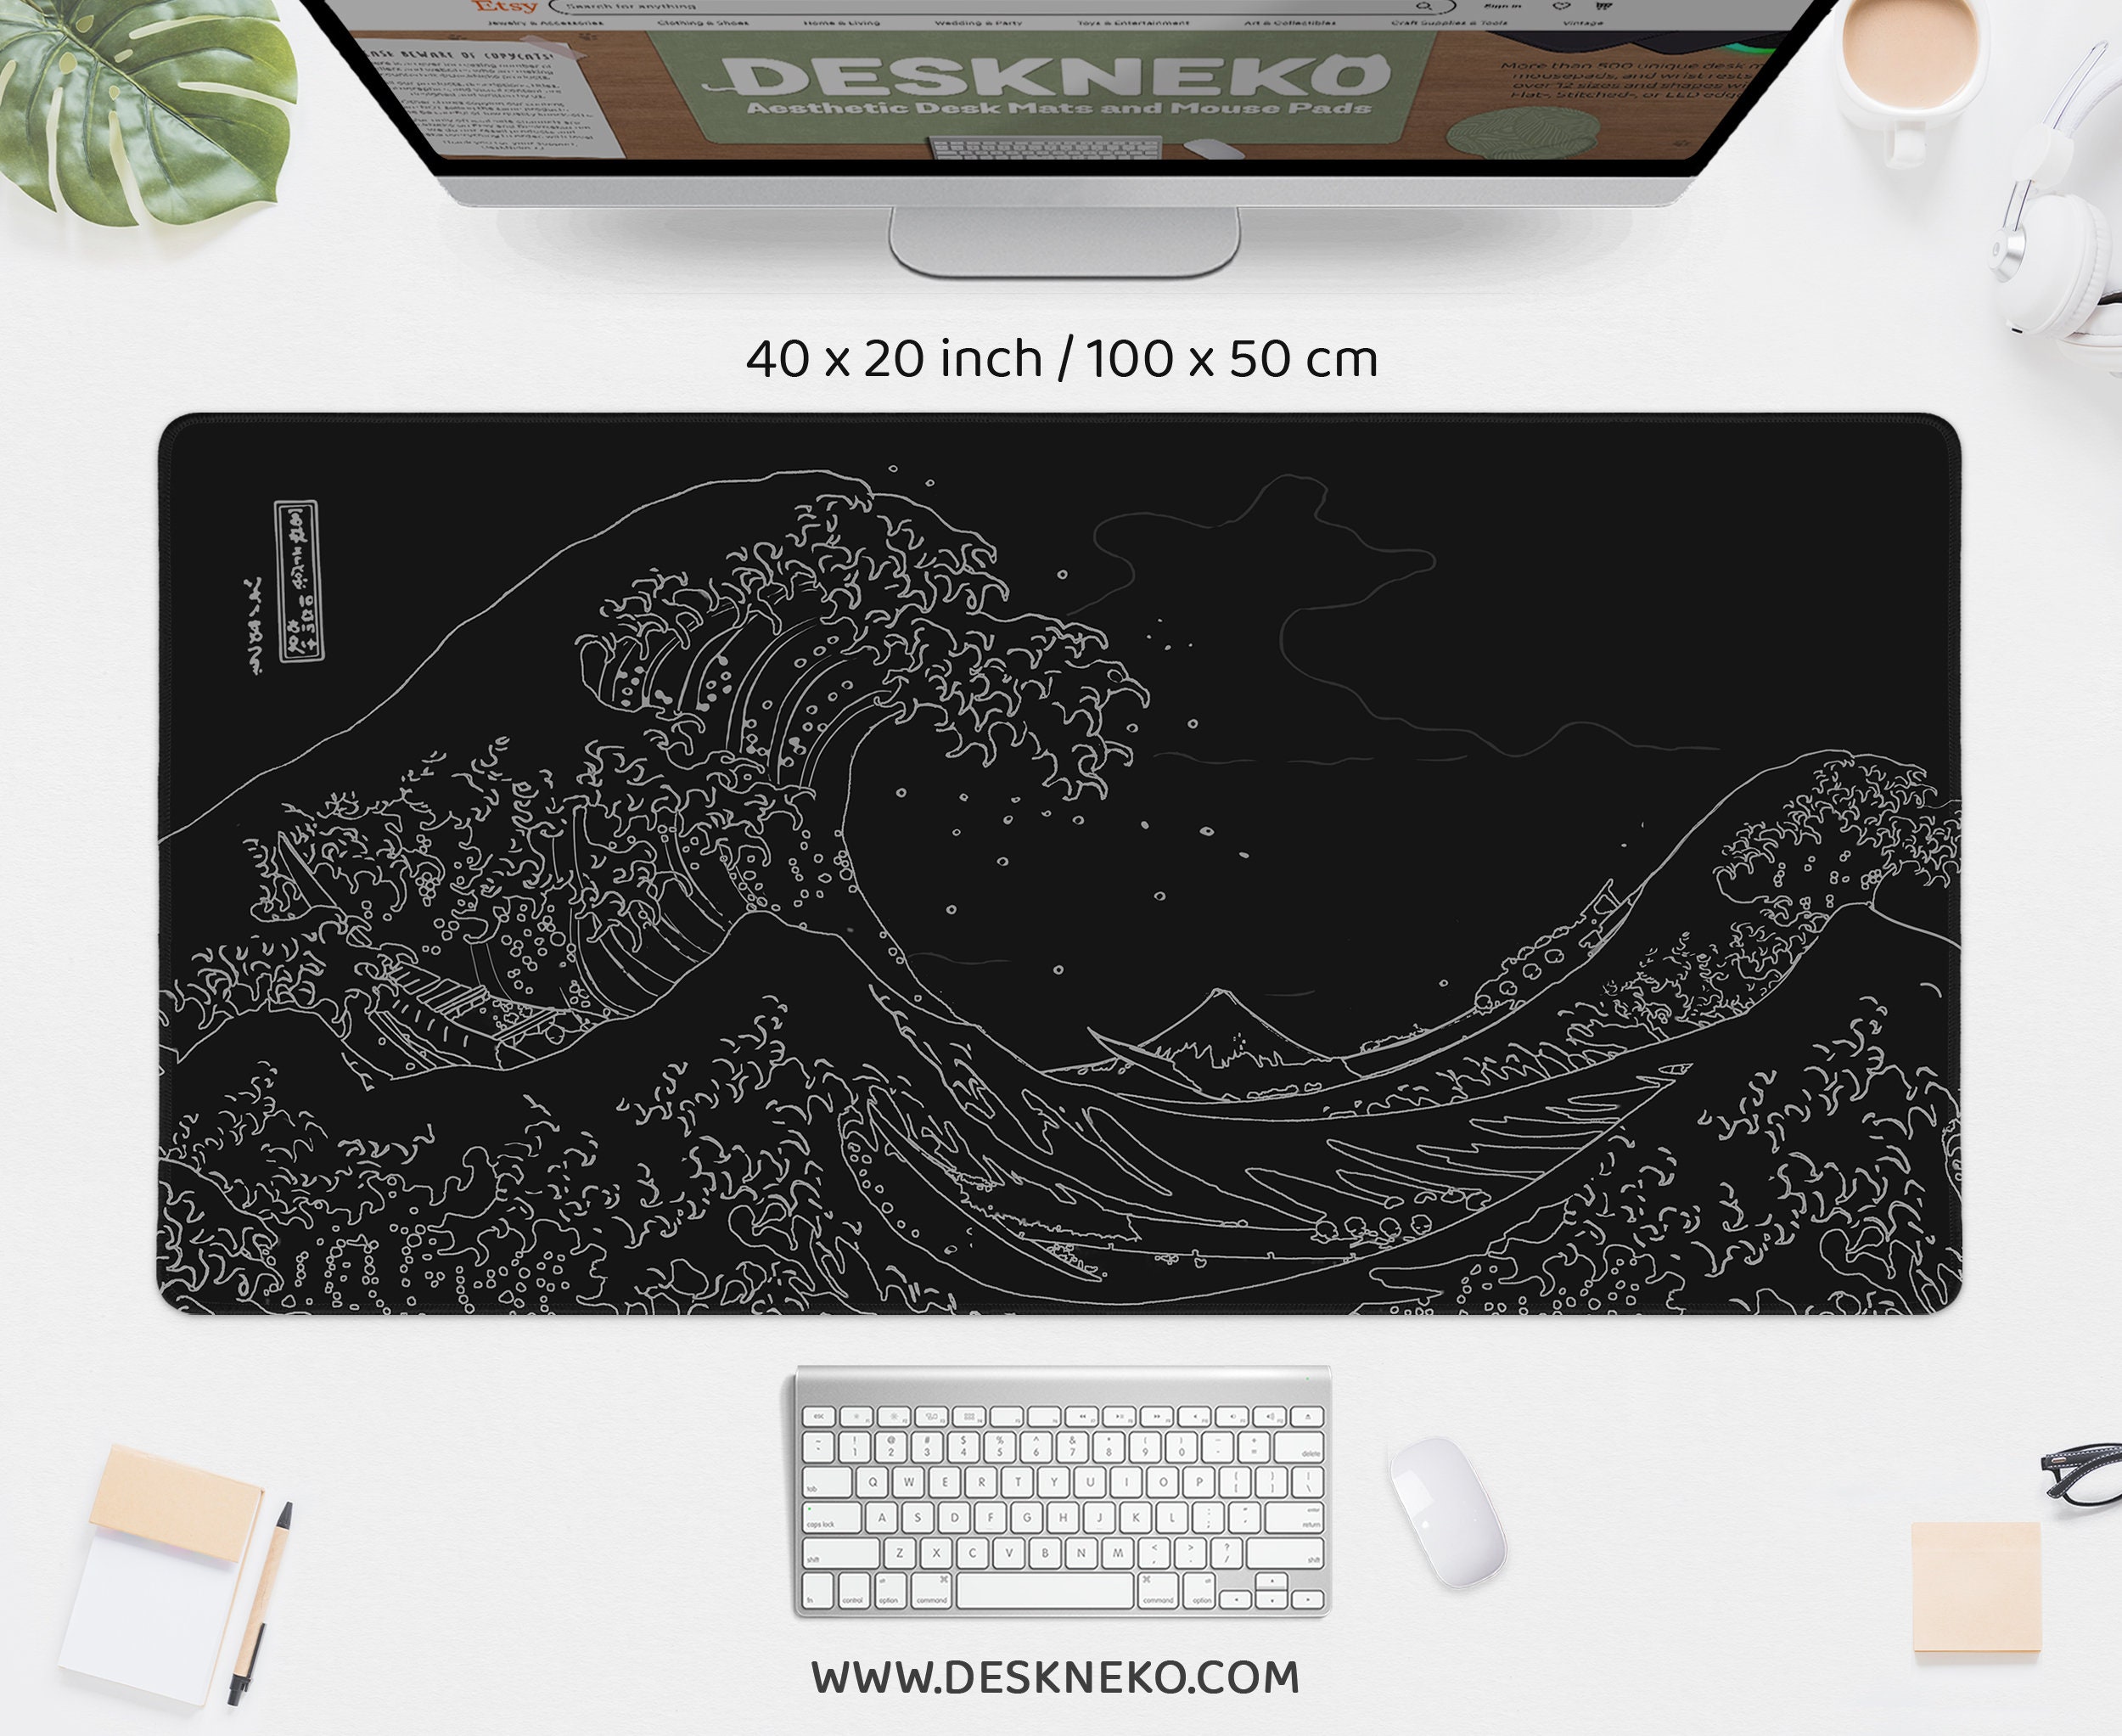 Great Wave Outline Black and White | Mouse Pad